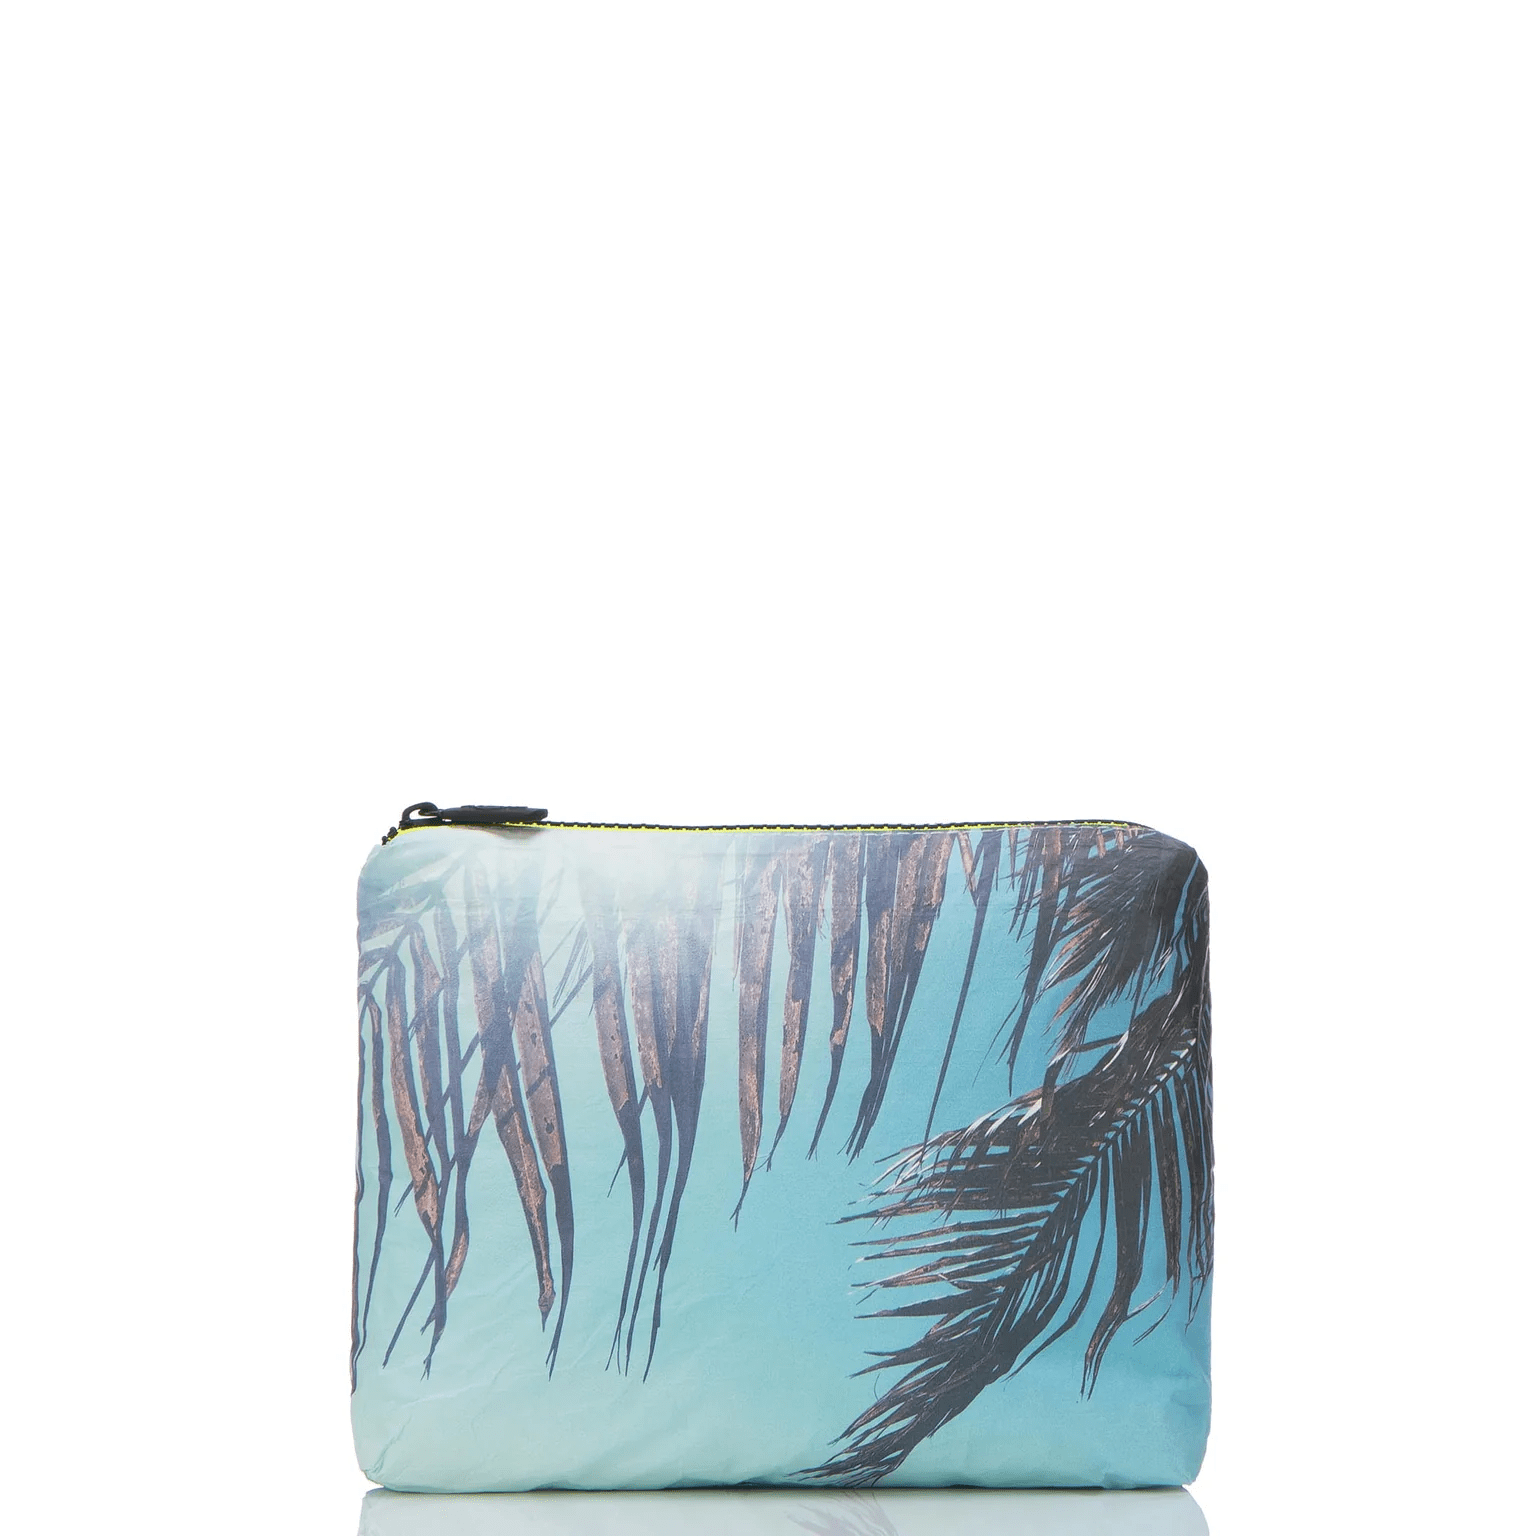 Tulum by Samudra Small Pouch